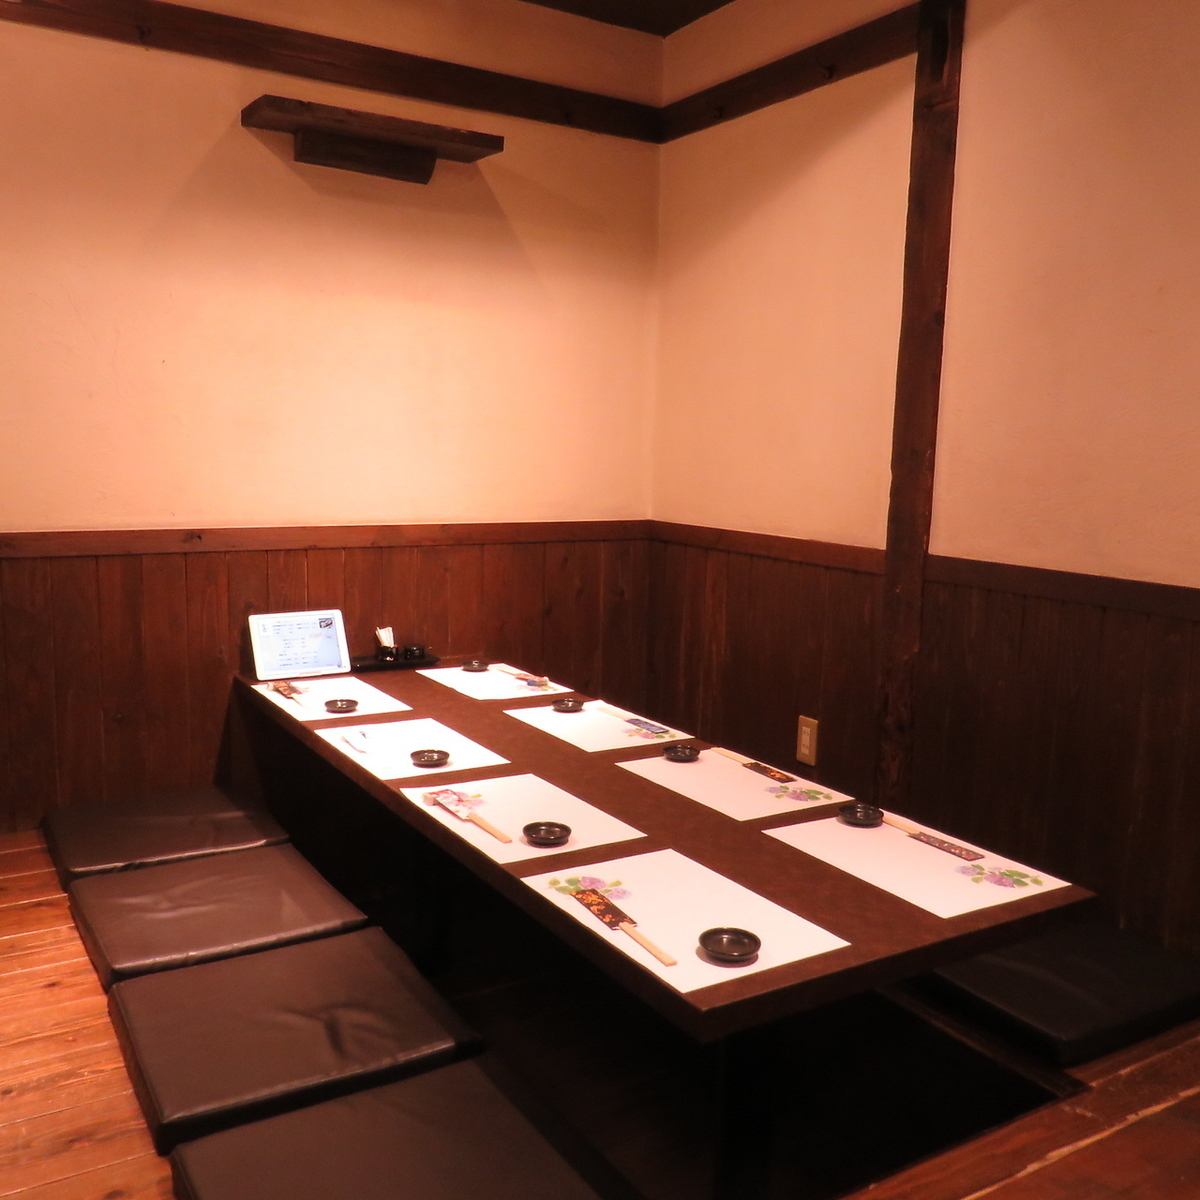 We have prepared a hori-kotatsu seat with a calm atmosphere that can seat up to 30 people.